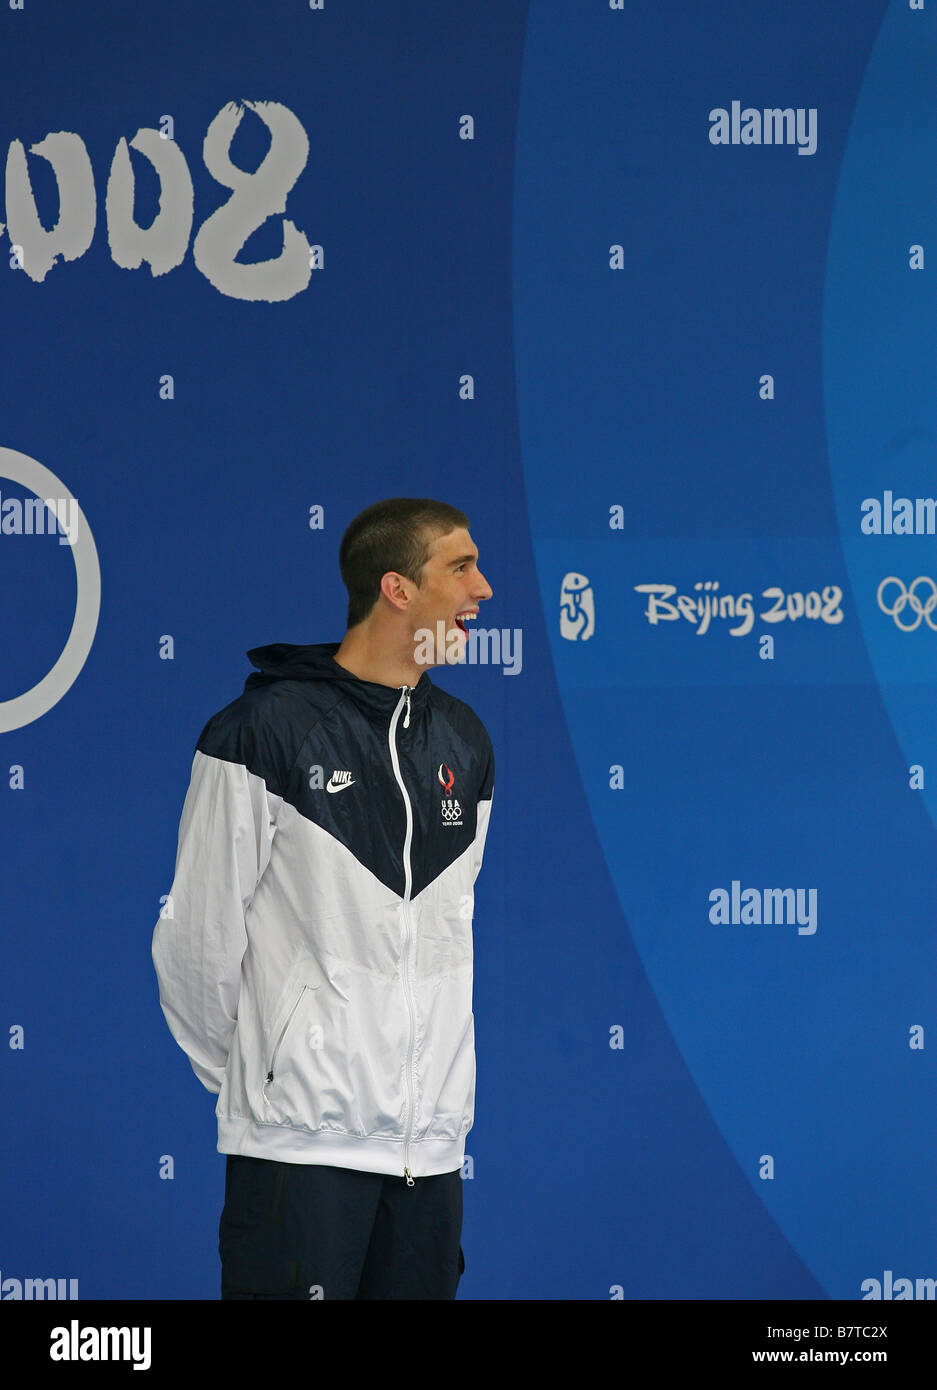 Michael Phelps laughs during the medal ceremony of one of his eight